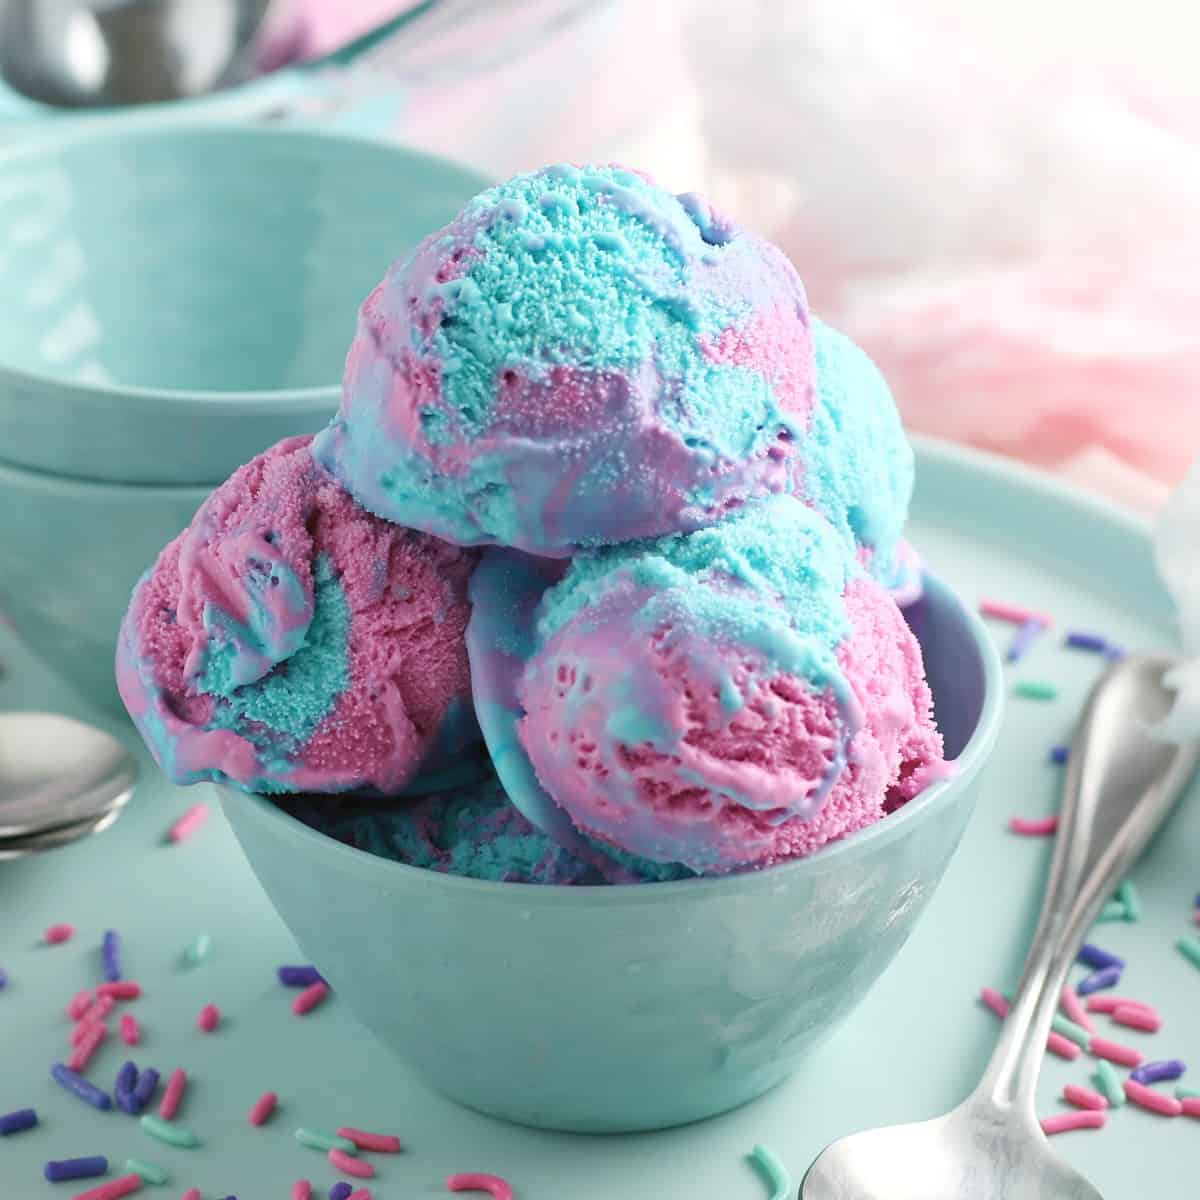 How to Make No-Churn Cotton Candy Ice Cream